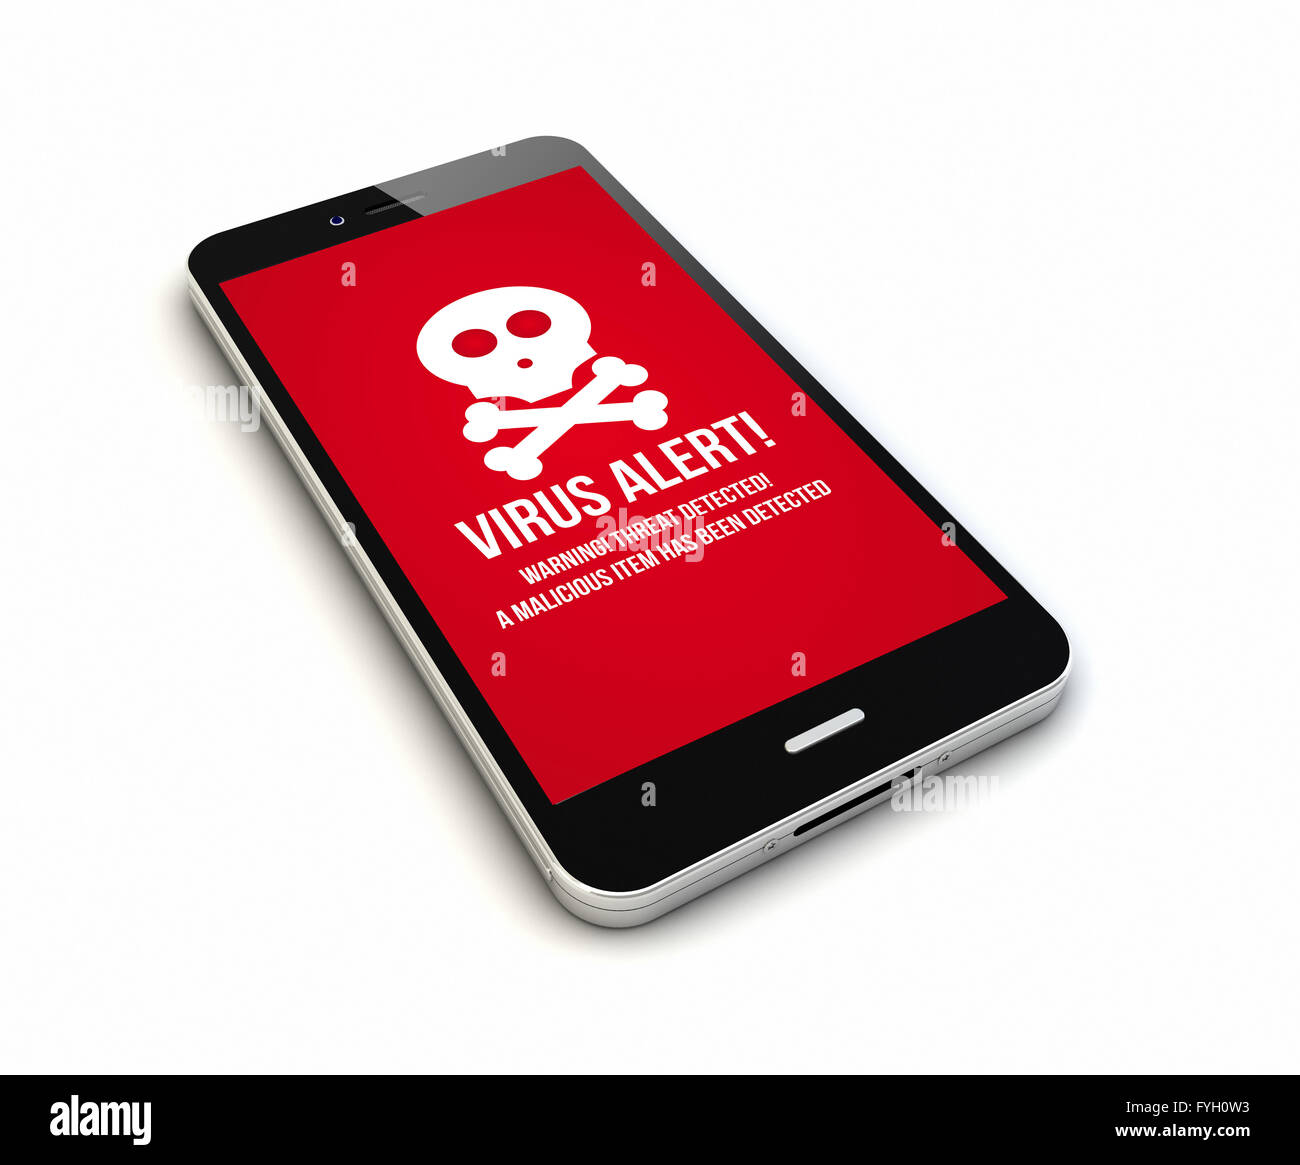 render of an original smartphone with virus alert on the screen. Screen graphics are made up. Stock Photo